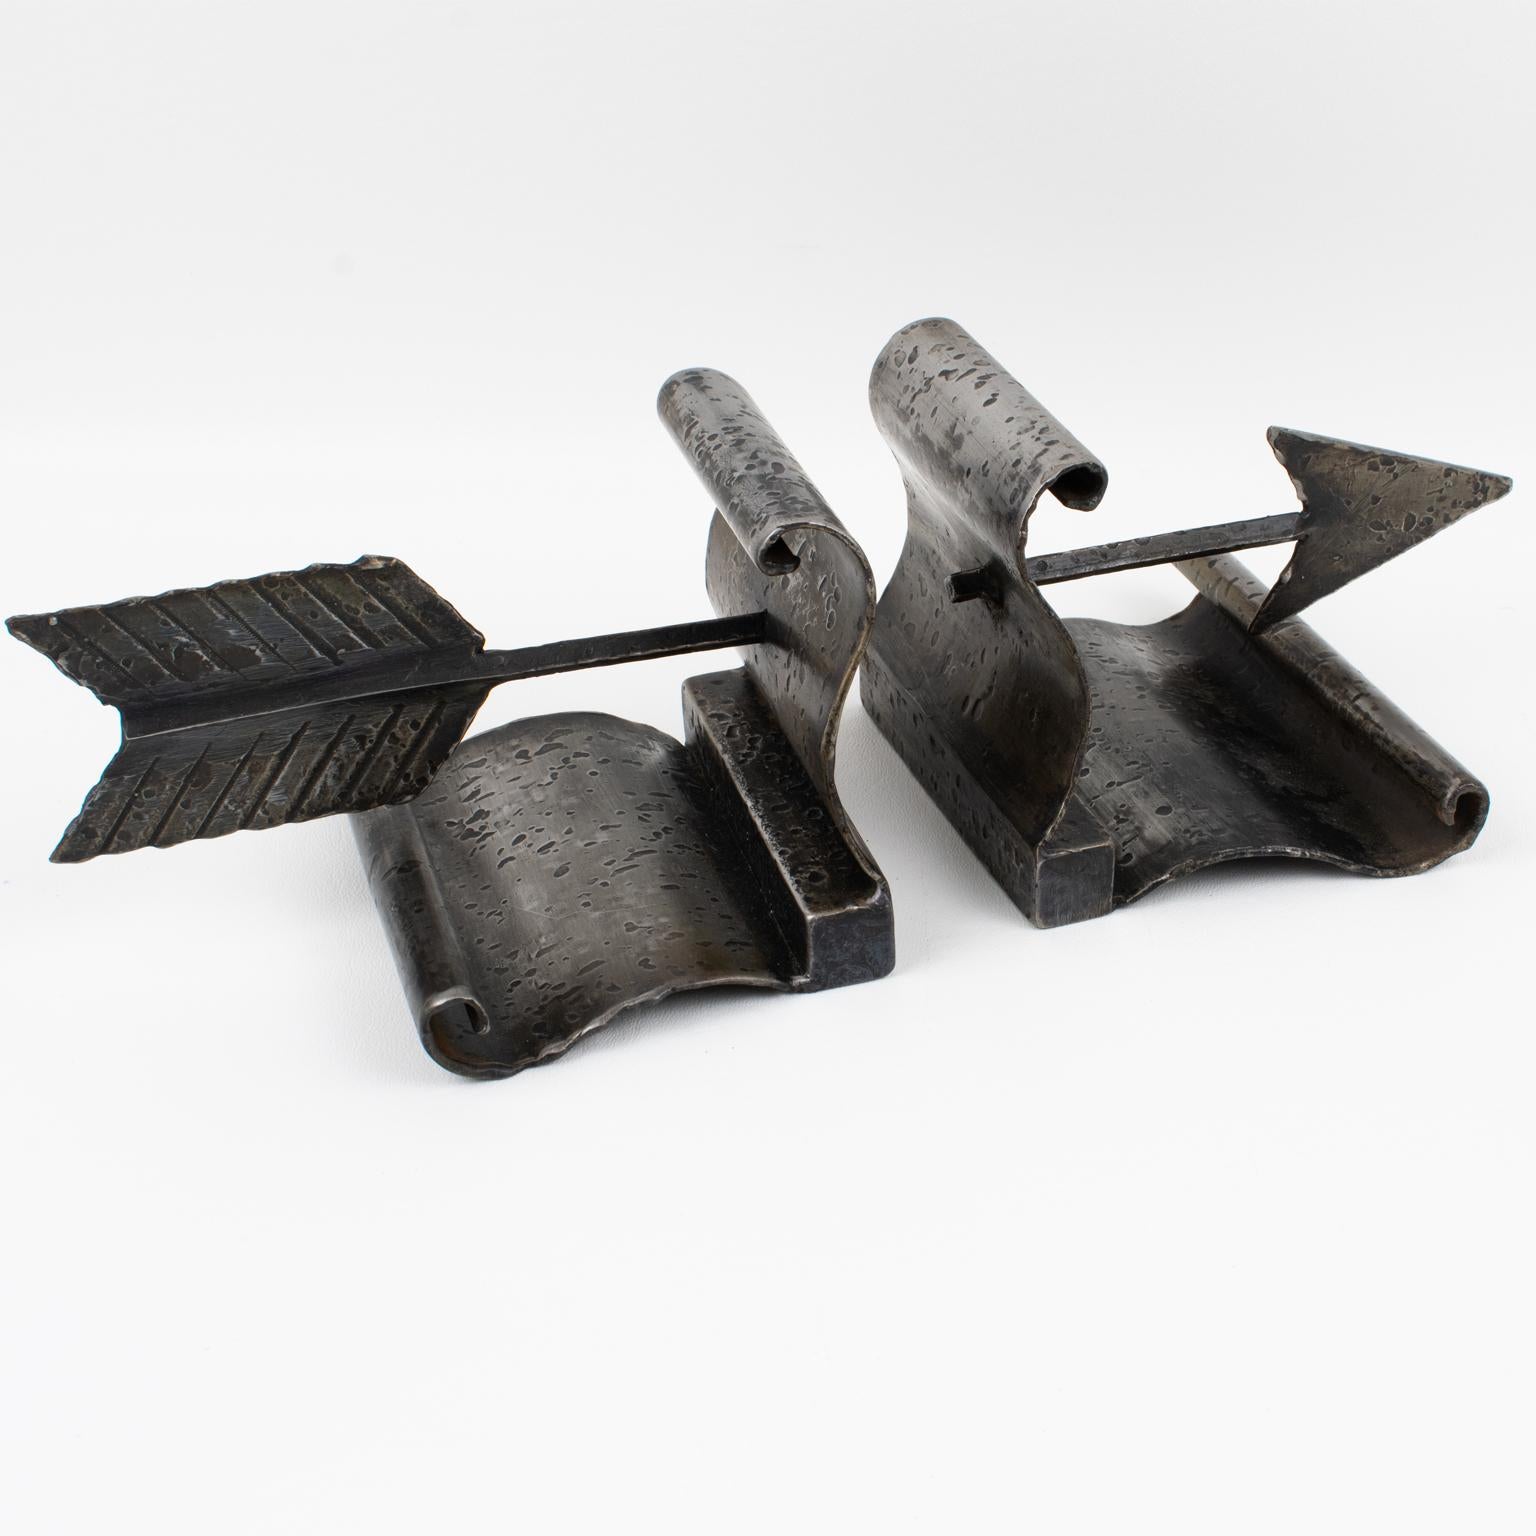 These stunning Machine Age Art Deco bookends were crafted in France in the 1940s. The wrought iron metal has an Industrial feel and features a crossing arrow. The original black-gunmetal patina has a textured pattern on the metal. These sturdy